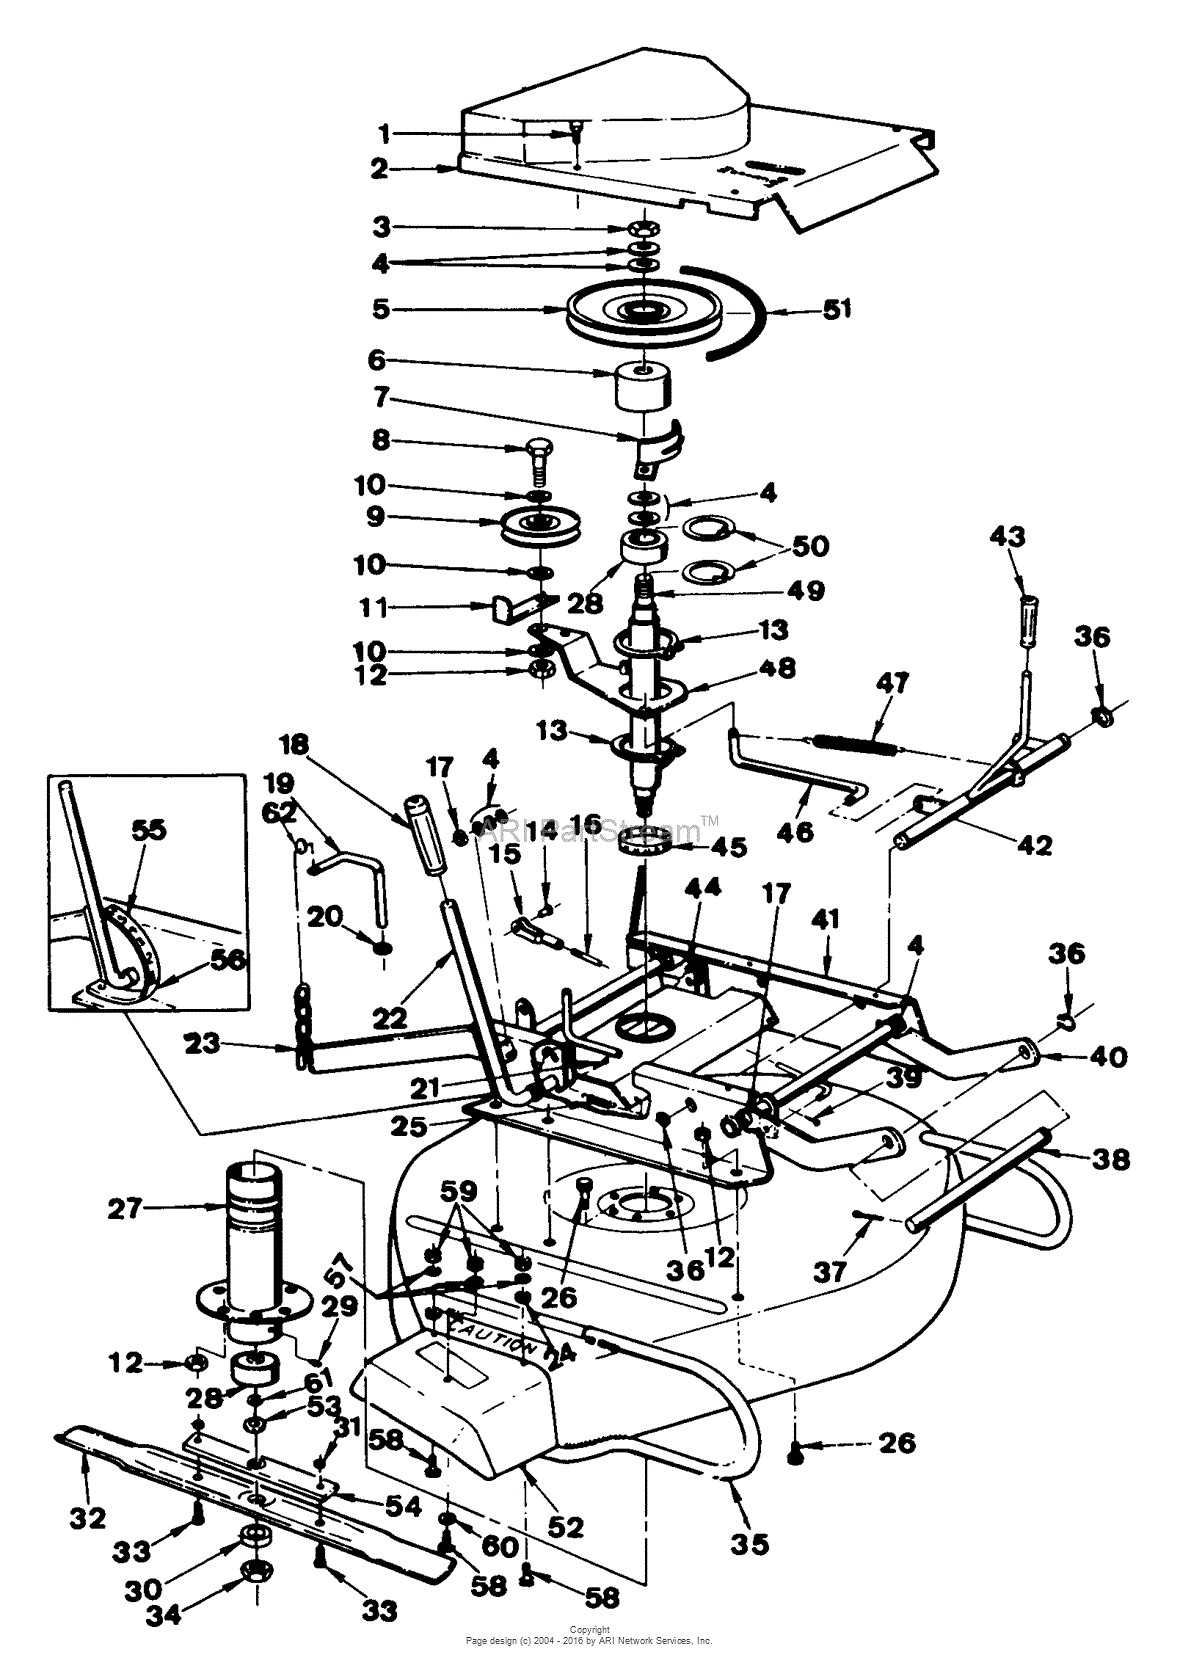 8 Hp Briggs and Stratton Engine Parts Diagram Snapper 308x 30" 8 Hp Rear Engine Rider Et Series X Parts Of 8 Hp Briggs and Stratton Engine Parts Diagram